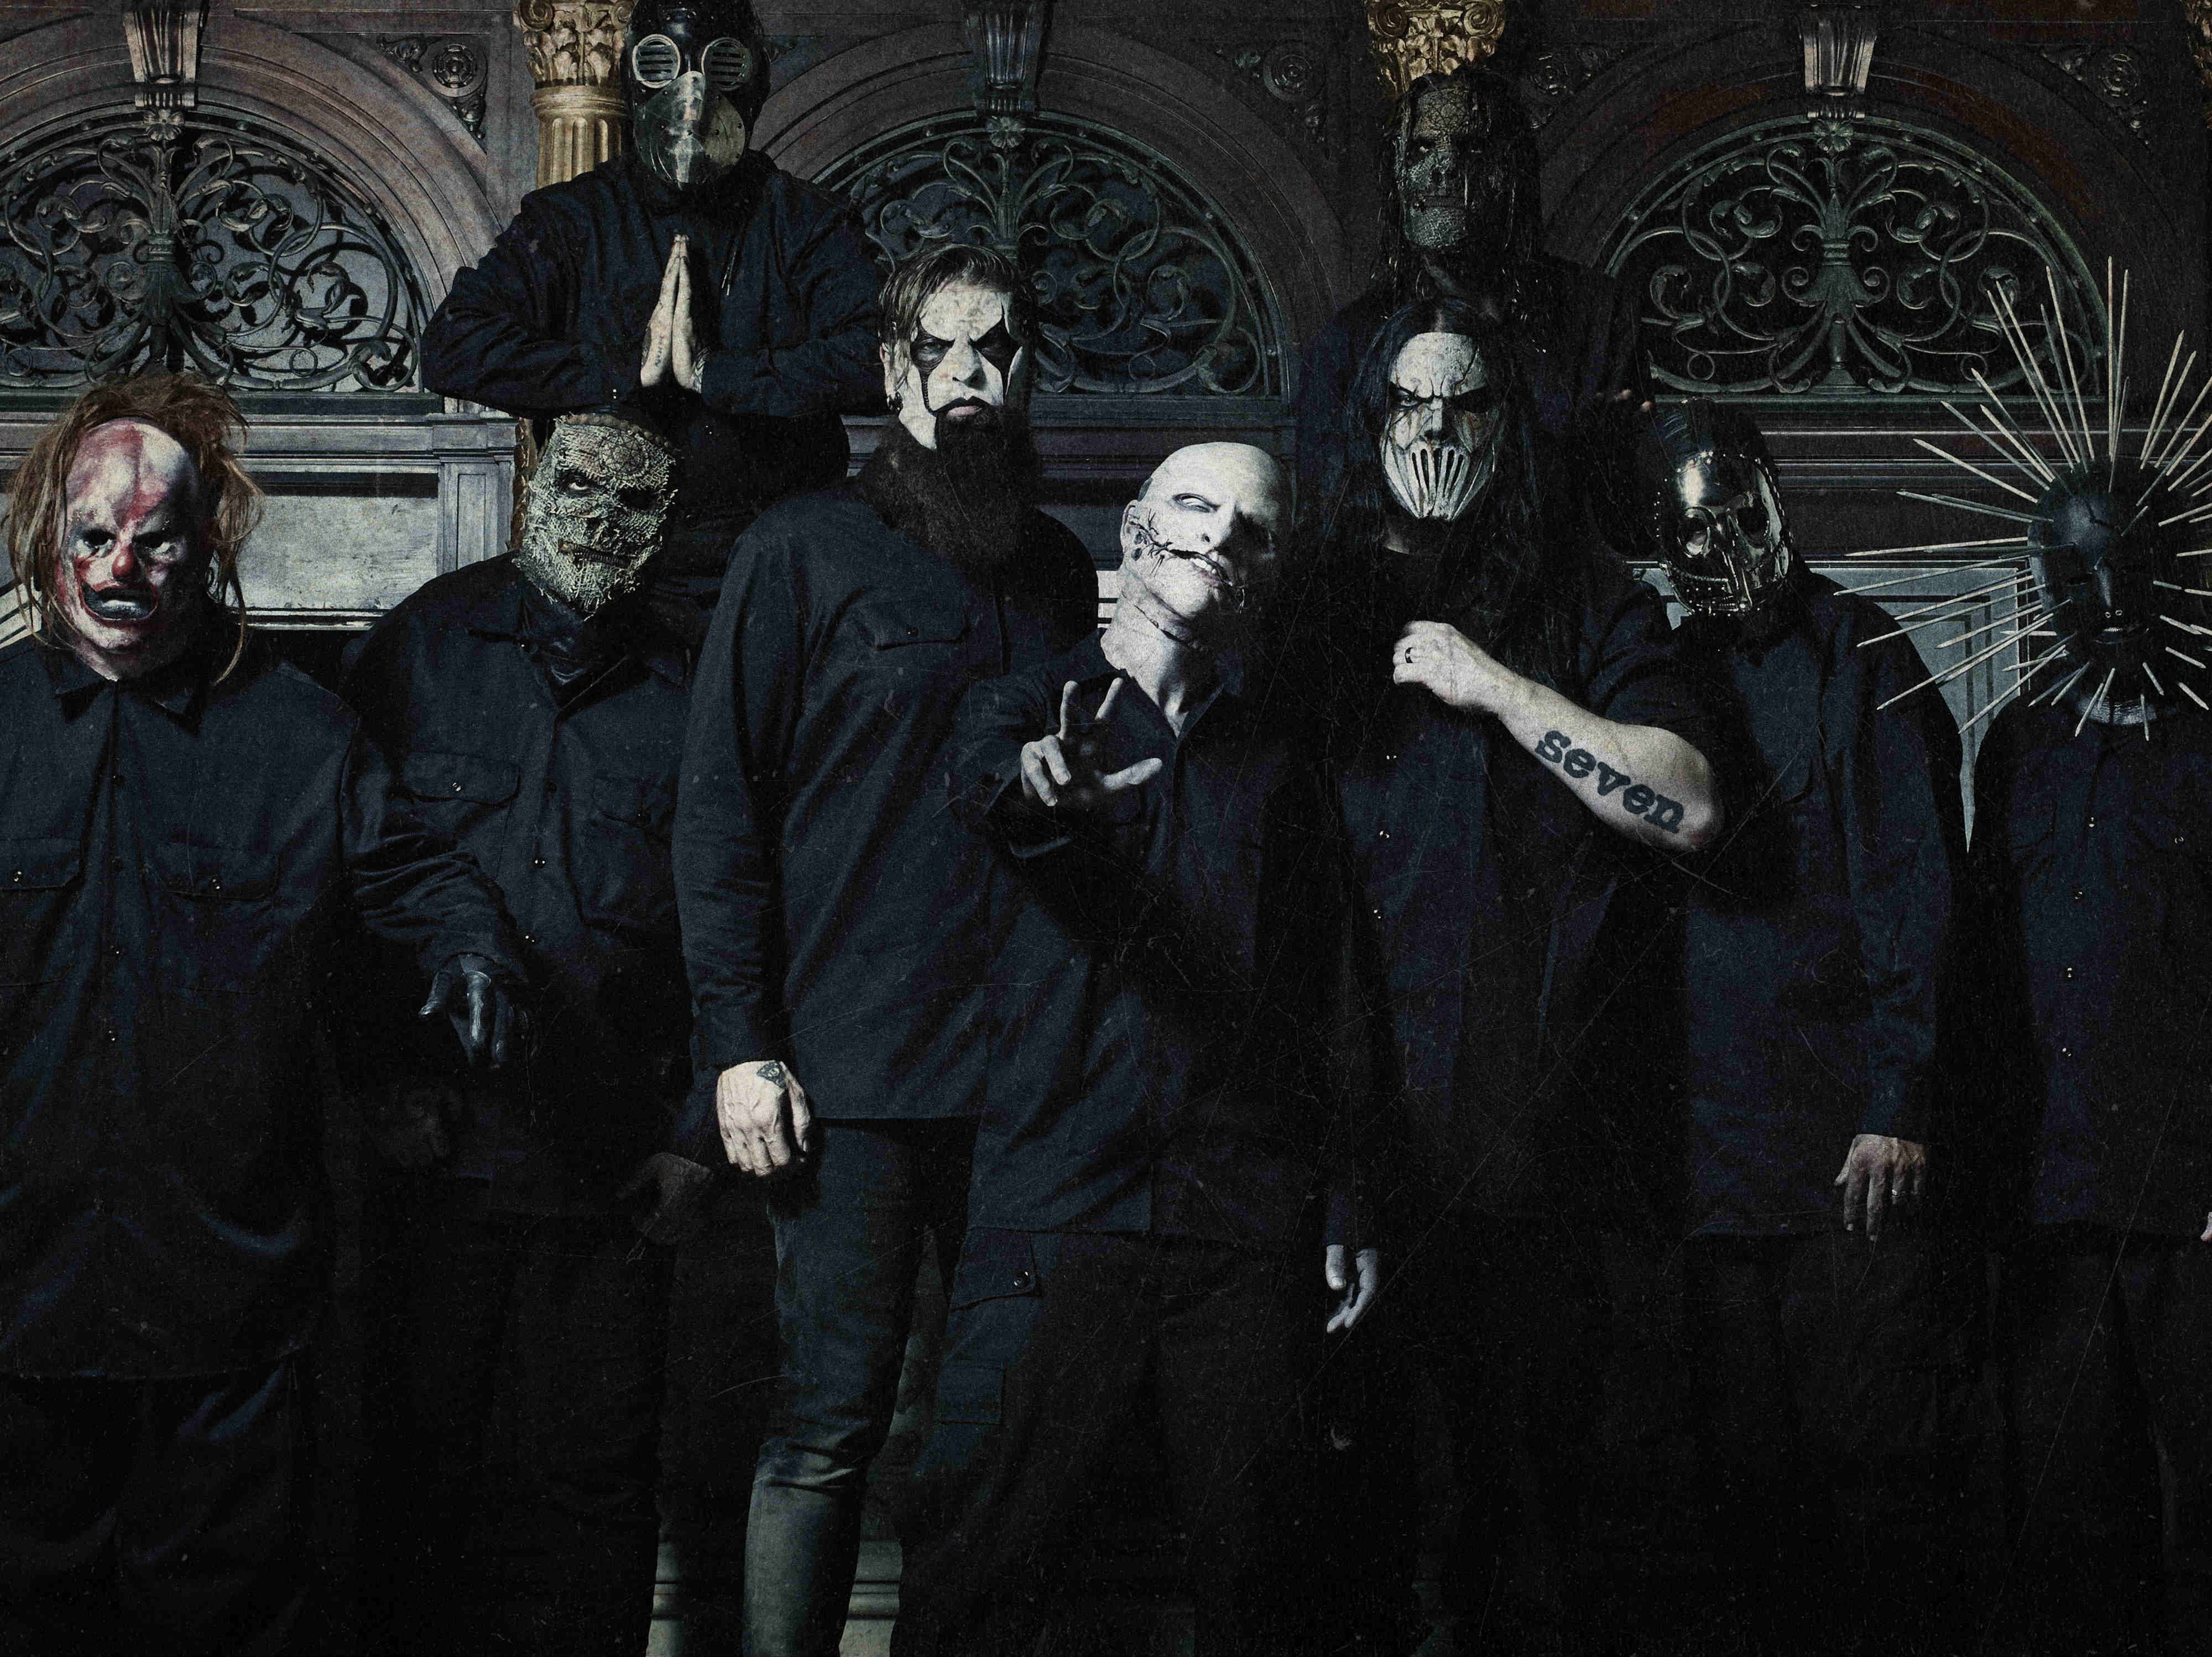 Slipknot Hd Wallpapers Desktop And Mobile Images Photos